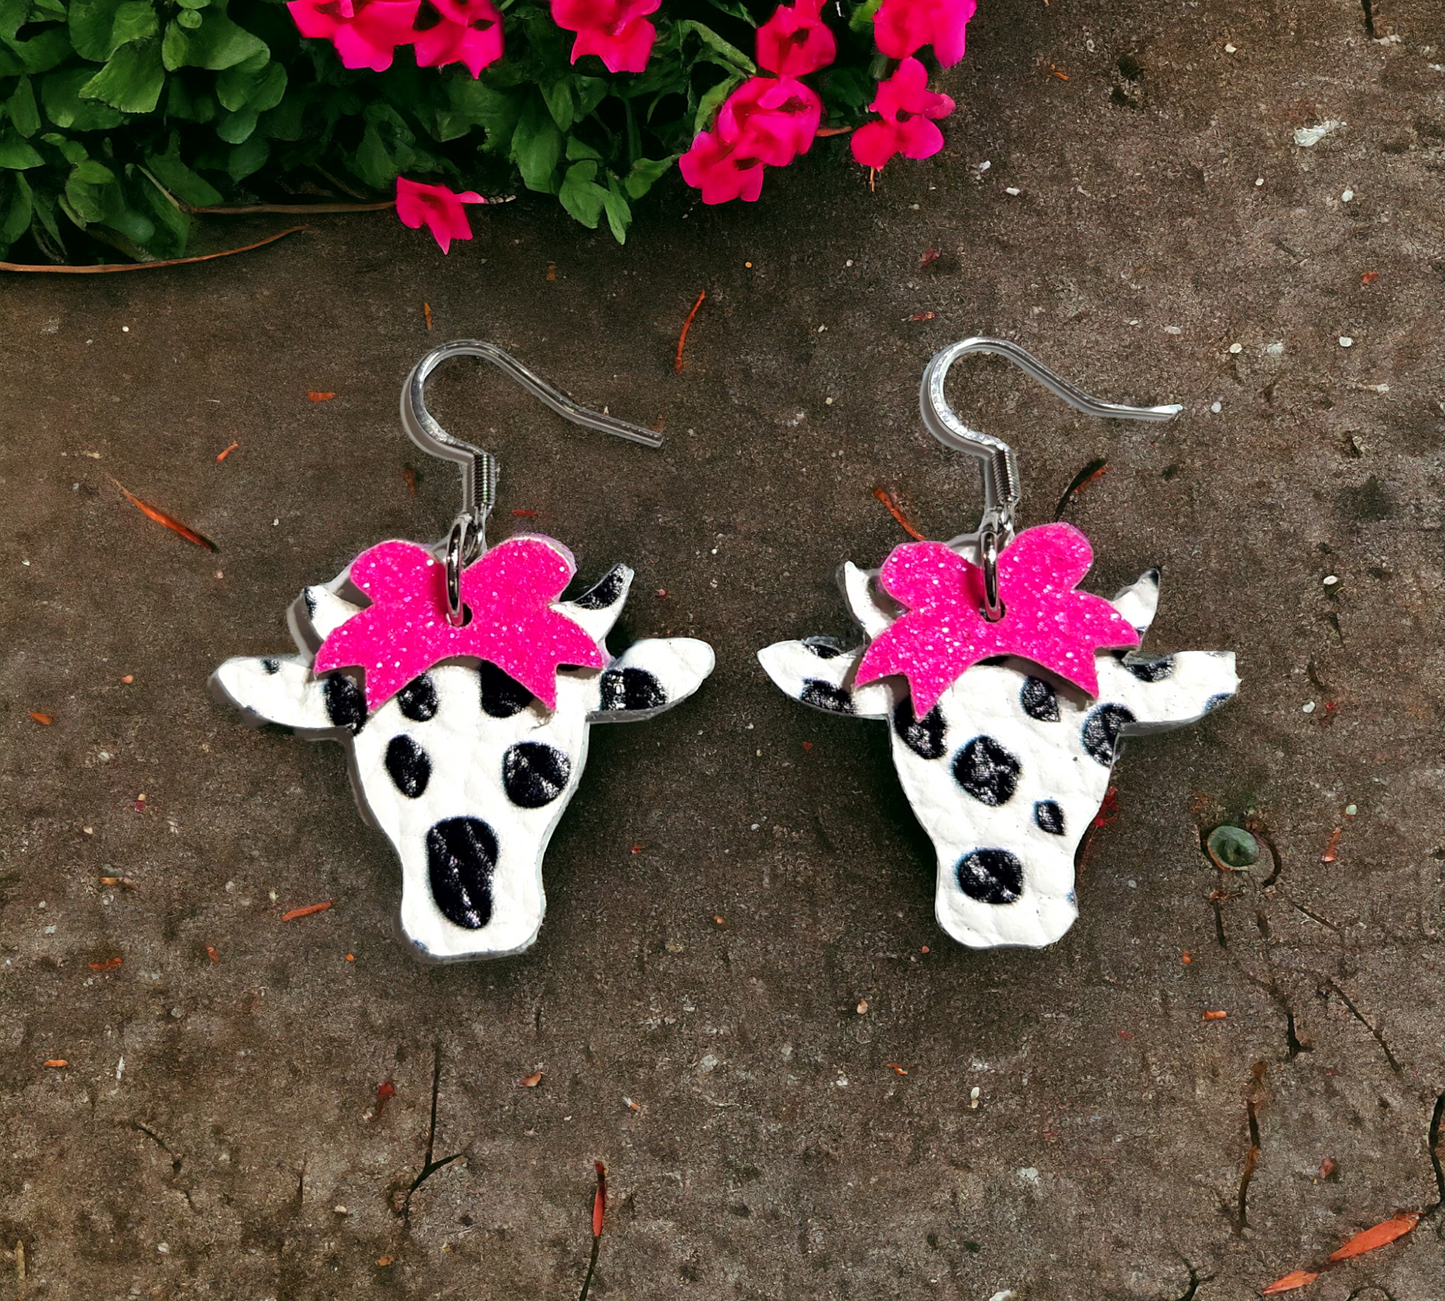 Black and white spotted cows with pink bows